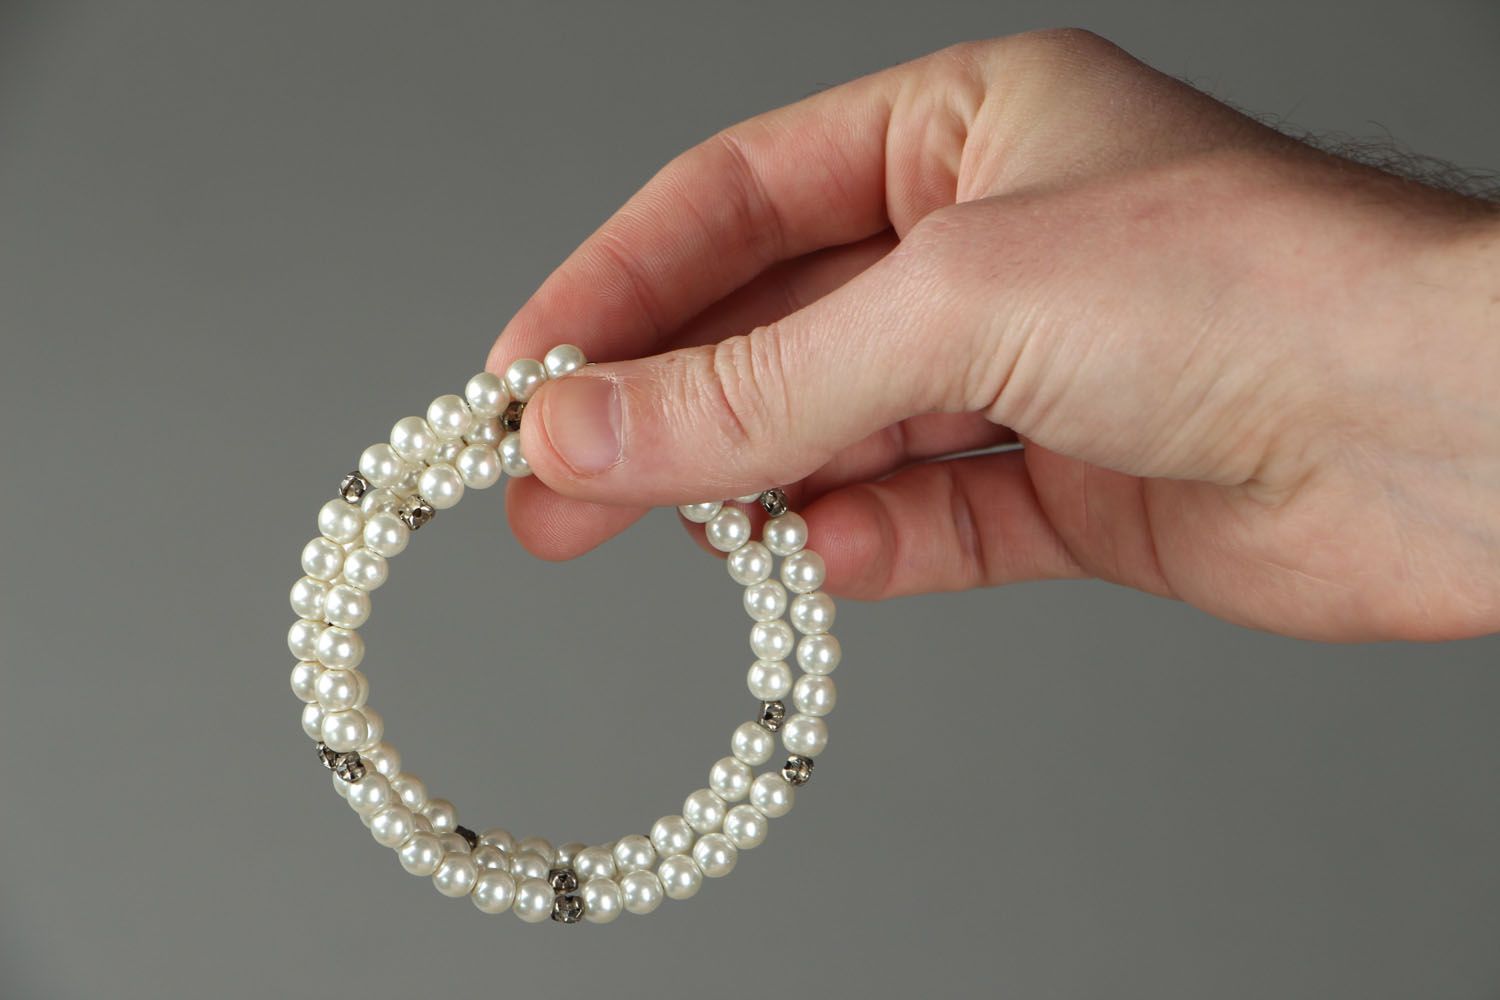 Bracelet made of artificial pearls photo 3